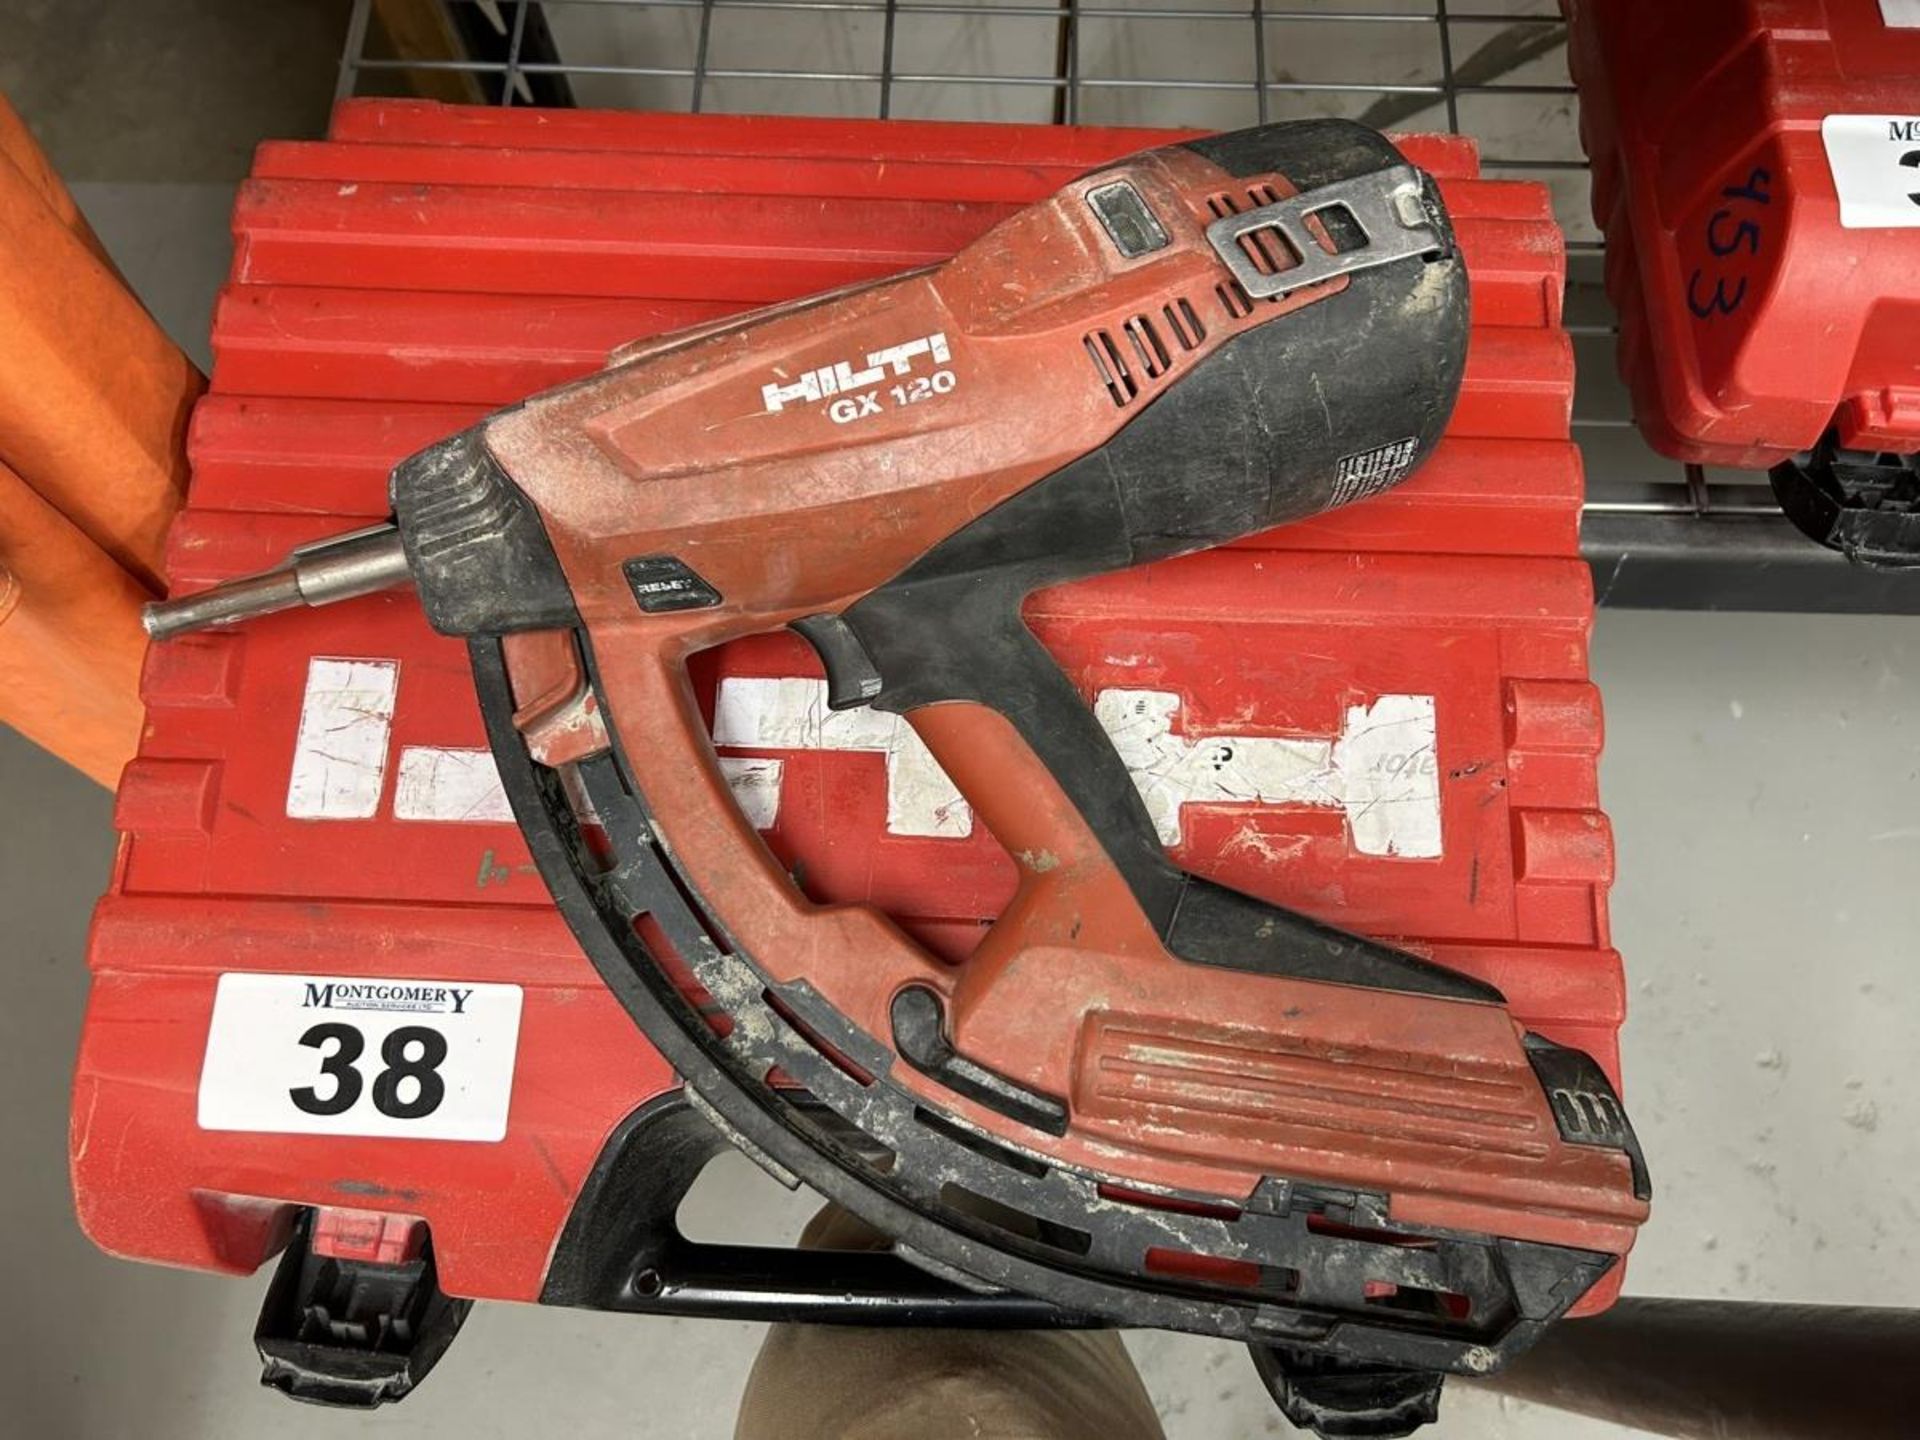 HILTI GX 120 GAS-ACTUATED FASTENING TOOL GAS NAILER WITH SINGLE POWER SOURCE FOR DRYWALL TRACK,